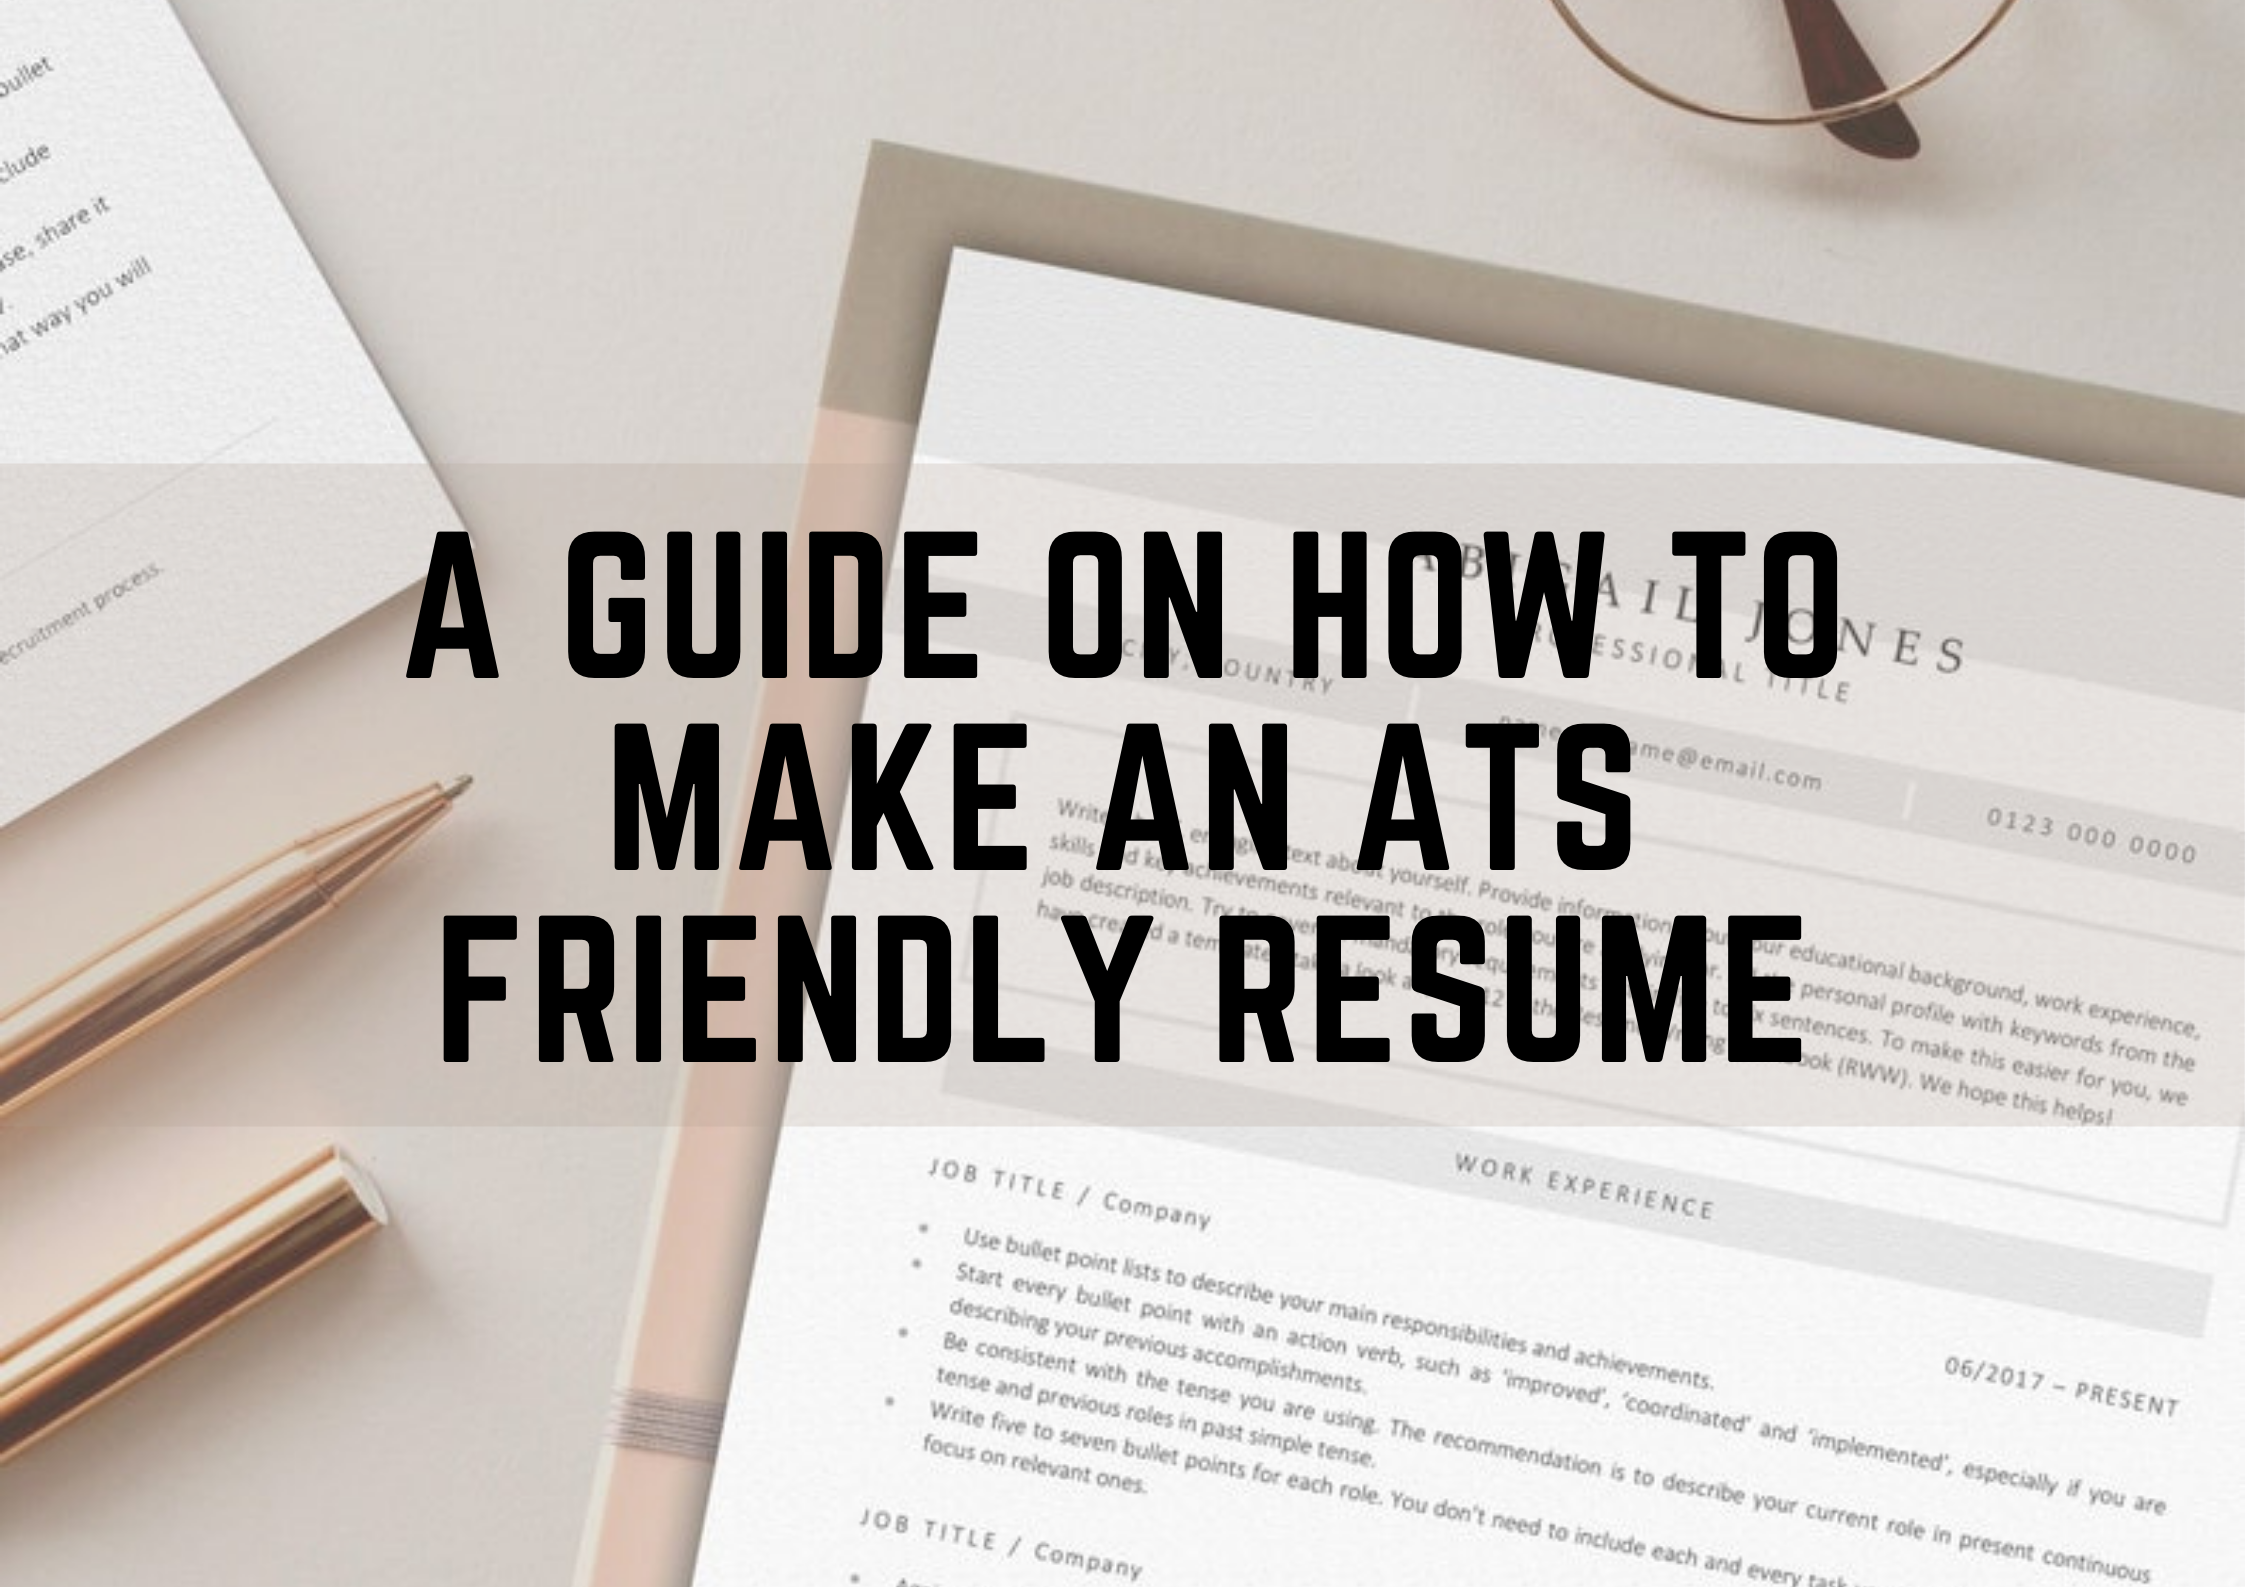 A Guide On How to Make an ATS Friendly Resume - Genie Resumes